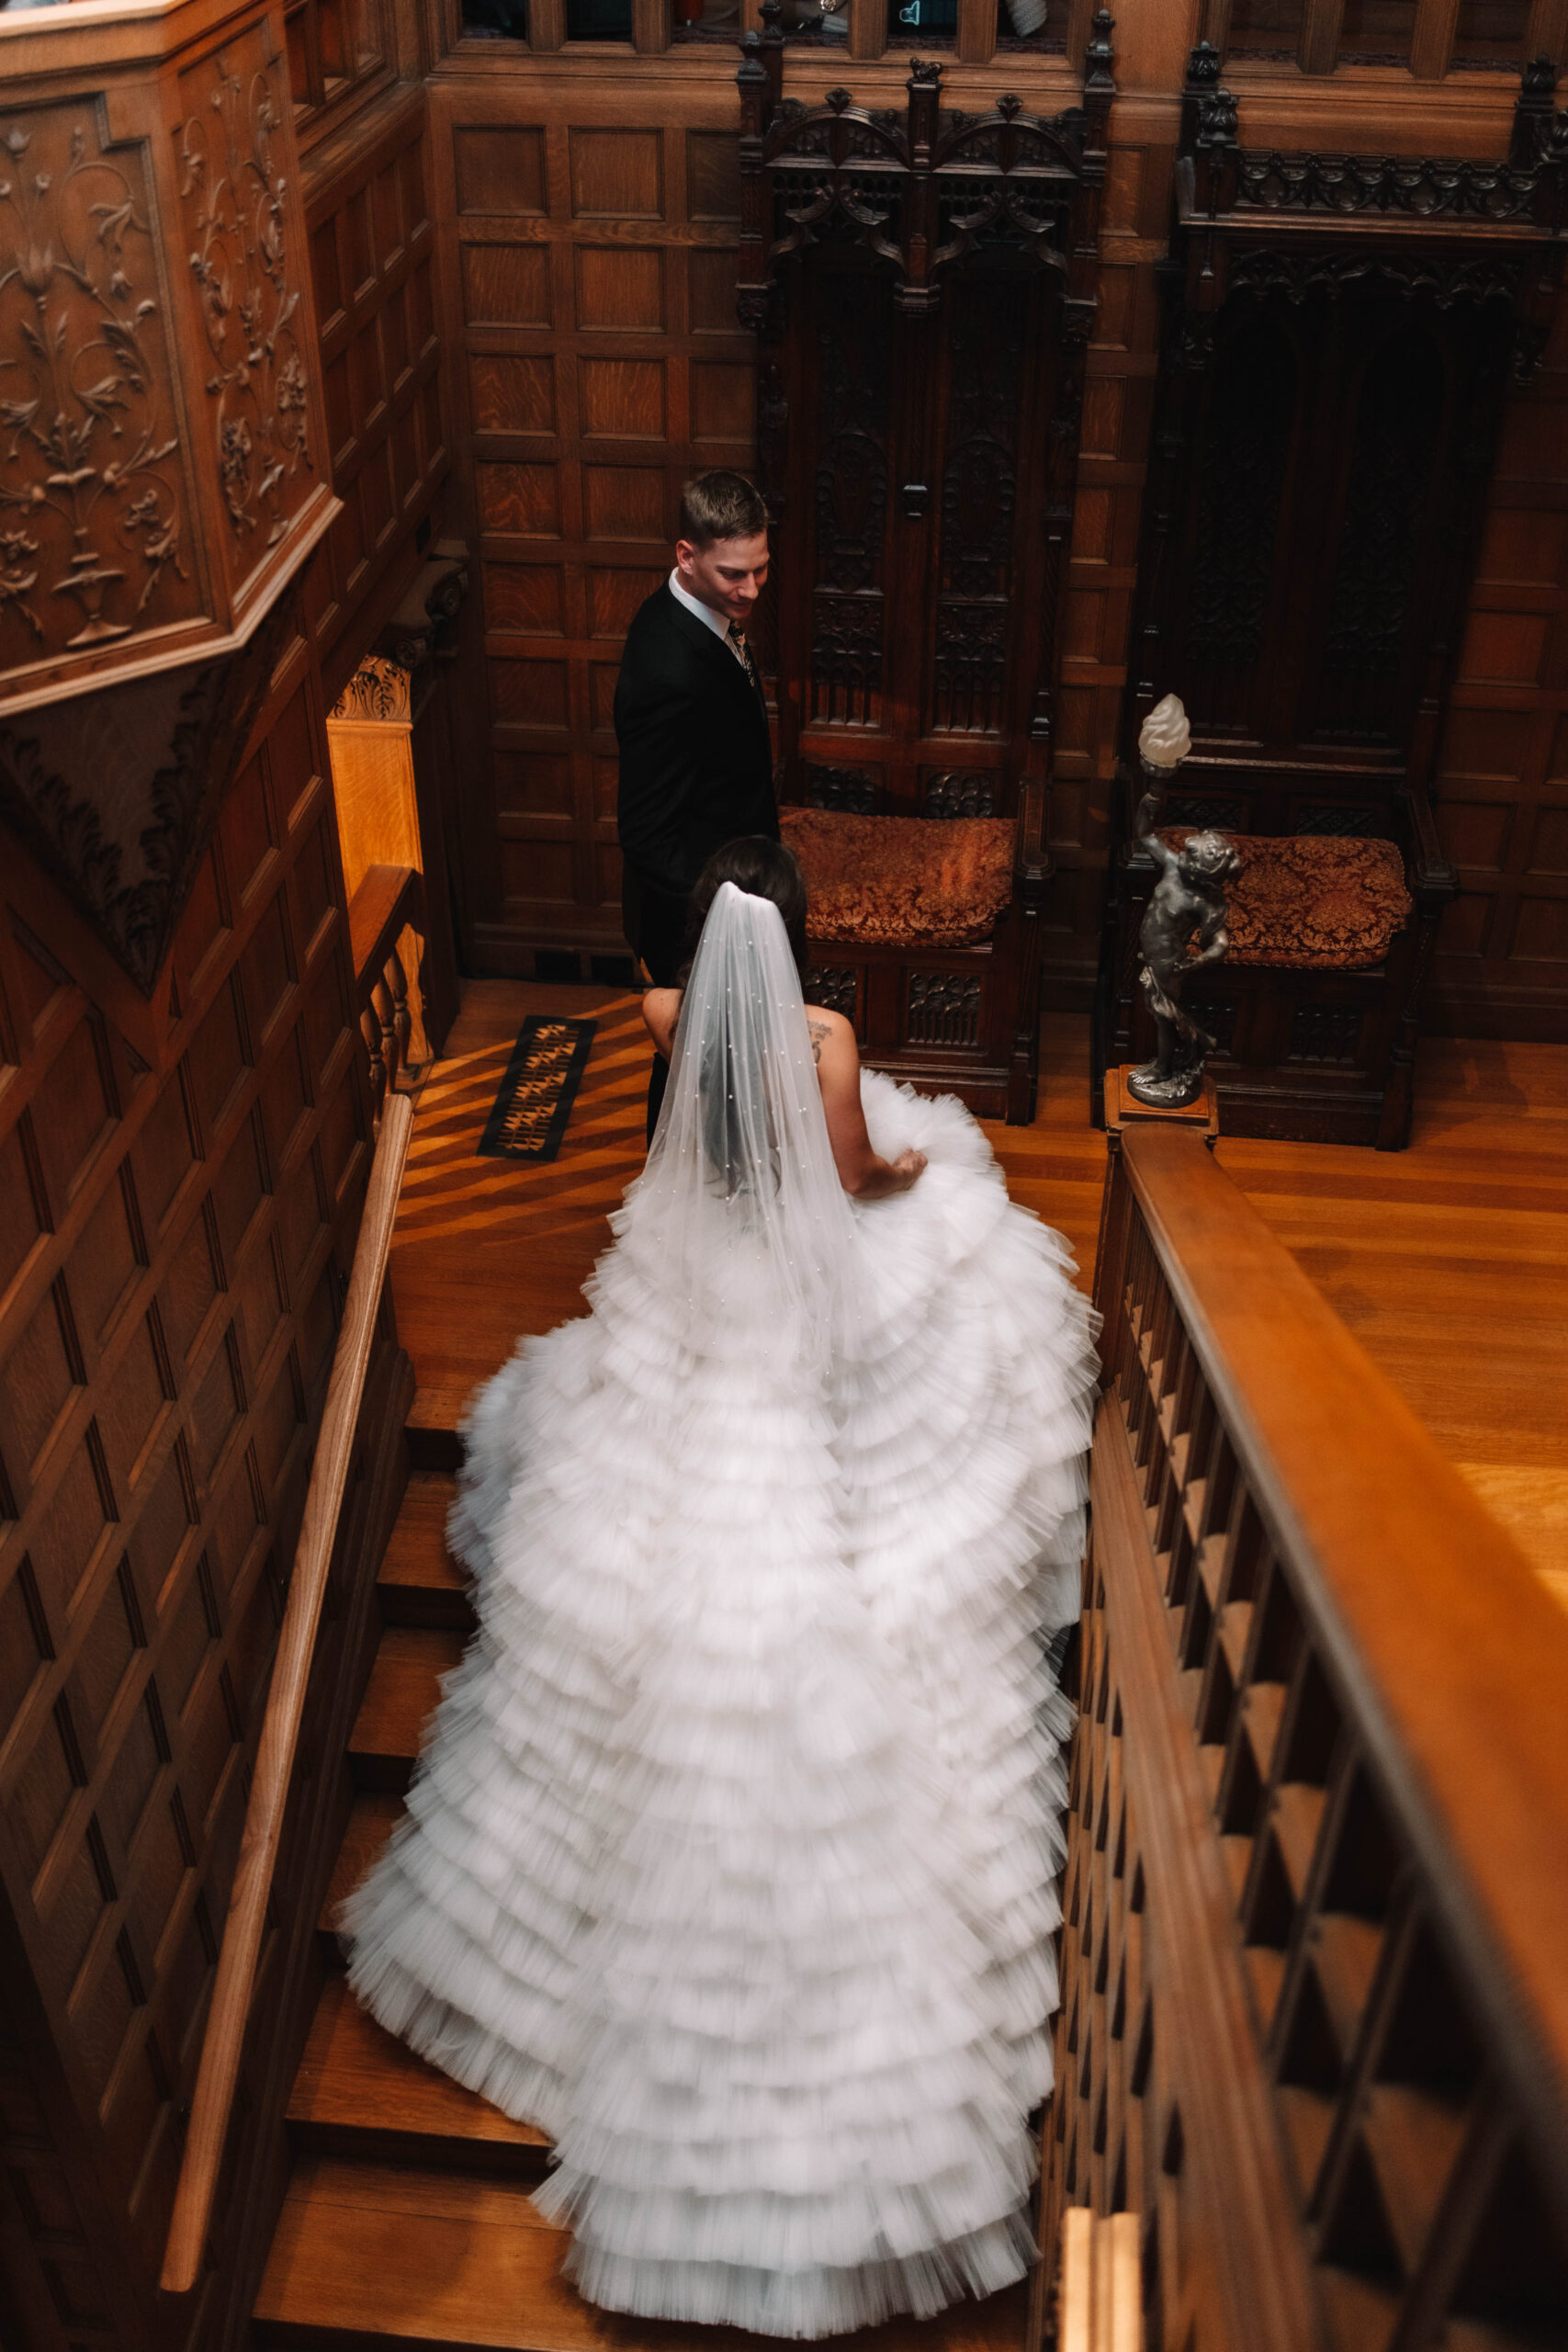 A couple descended a wooden staircase; the woman wore a voluminous white wedding gown with a long train, and the man is in a formal suit. The surroundings featured intricate wood paneling and carvings.